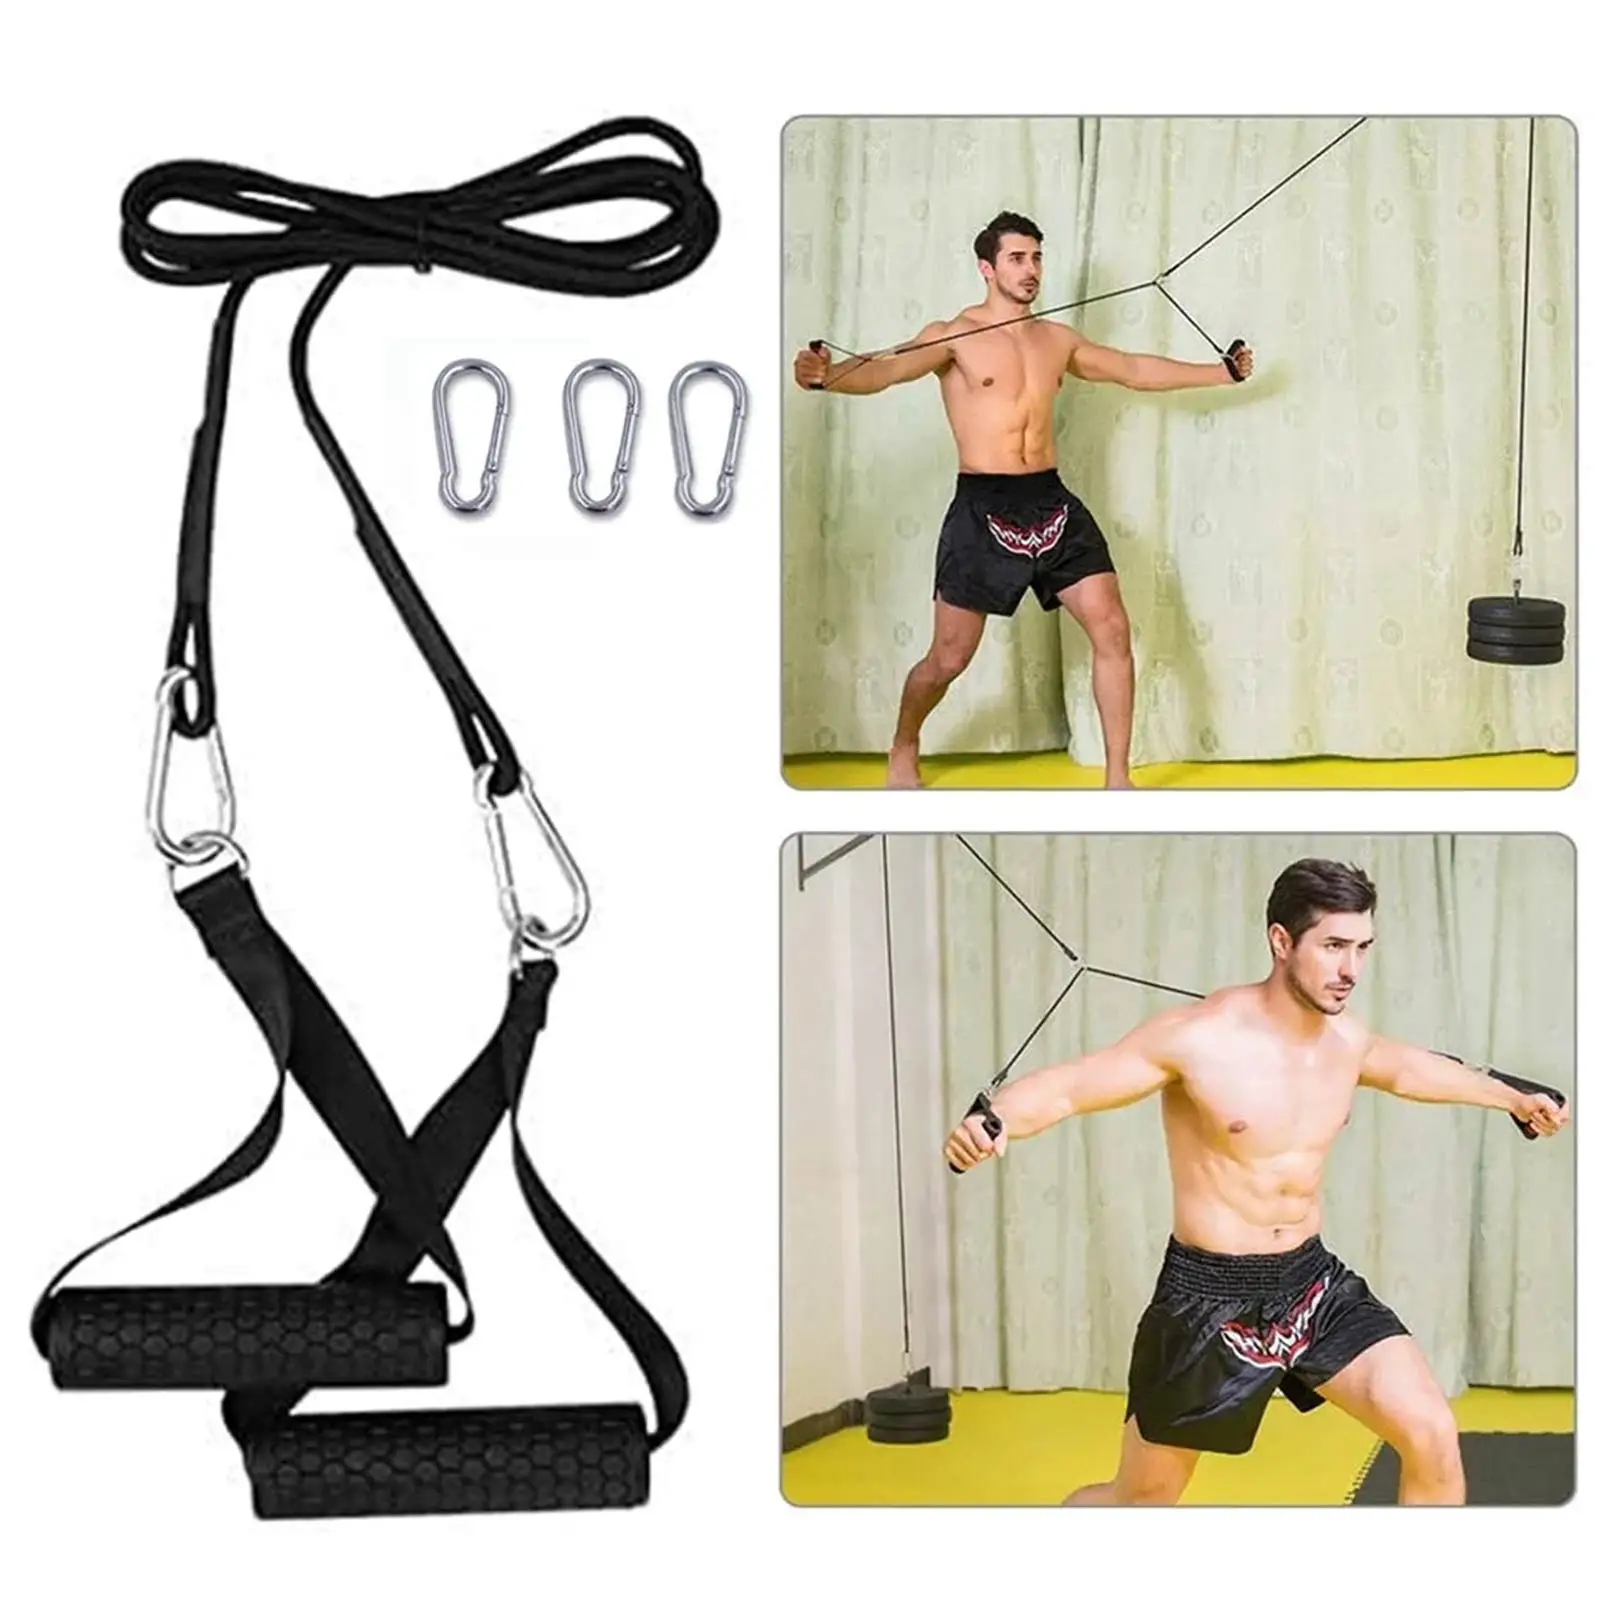 

Fitness Exerciser Workout Belt Grips Heavy-duty Cable Pulley Handles Equipment Strength Hanging Training Strap Exercise Handles